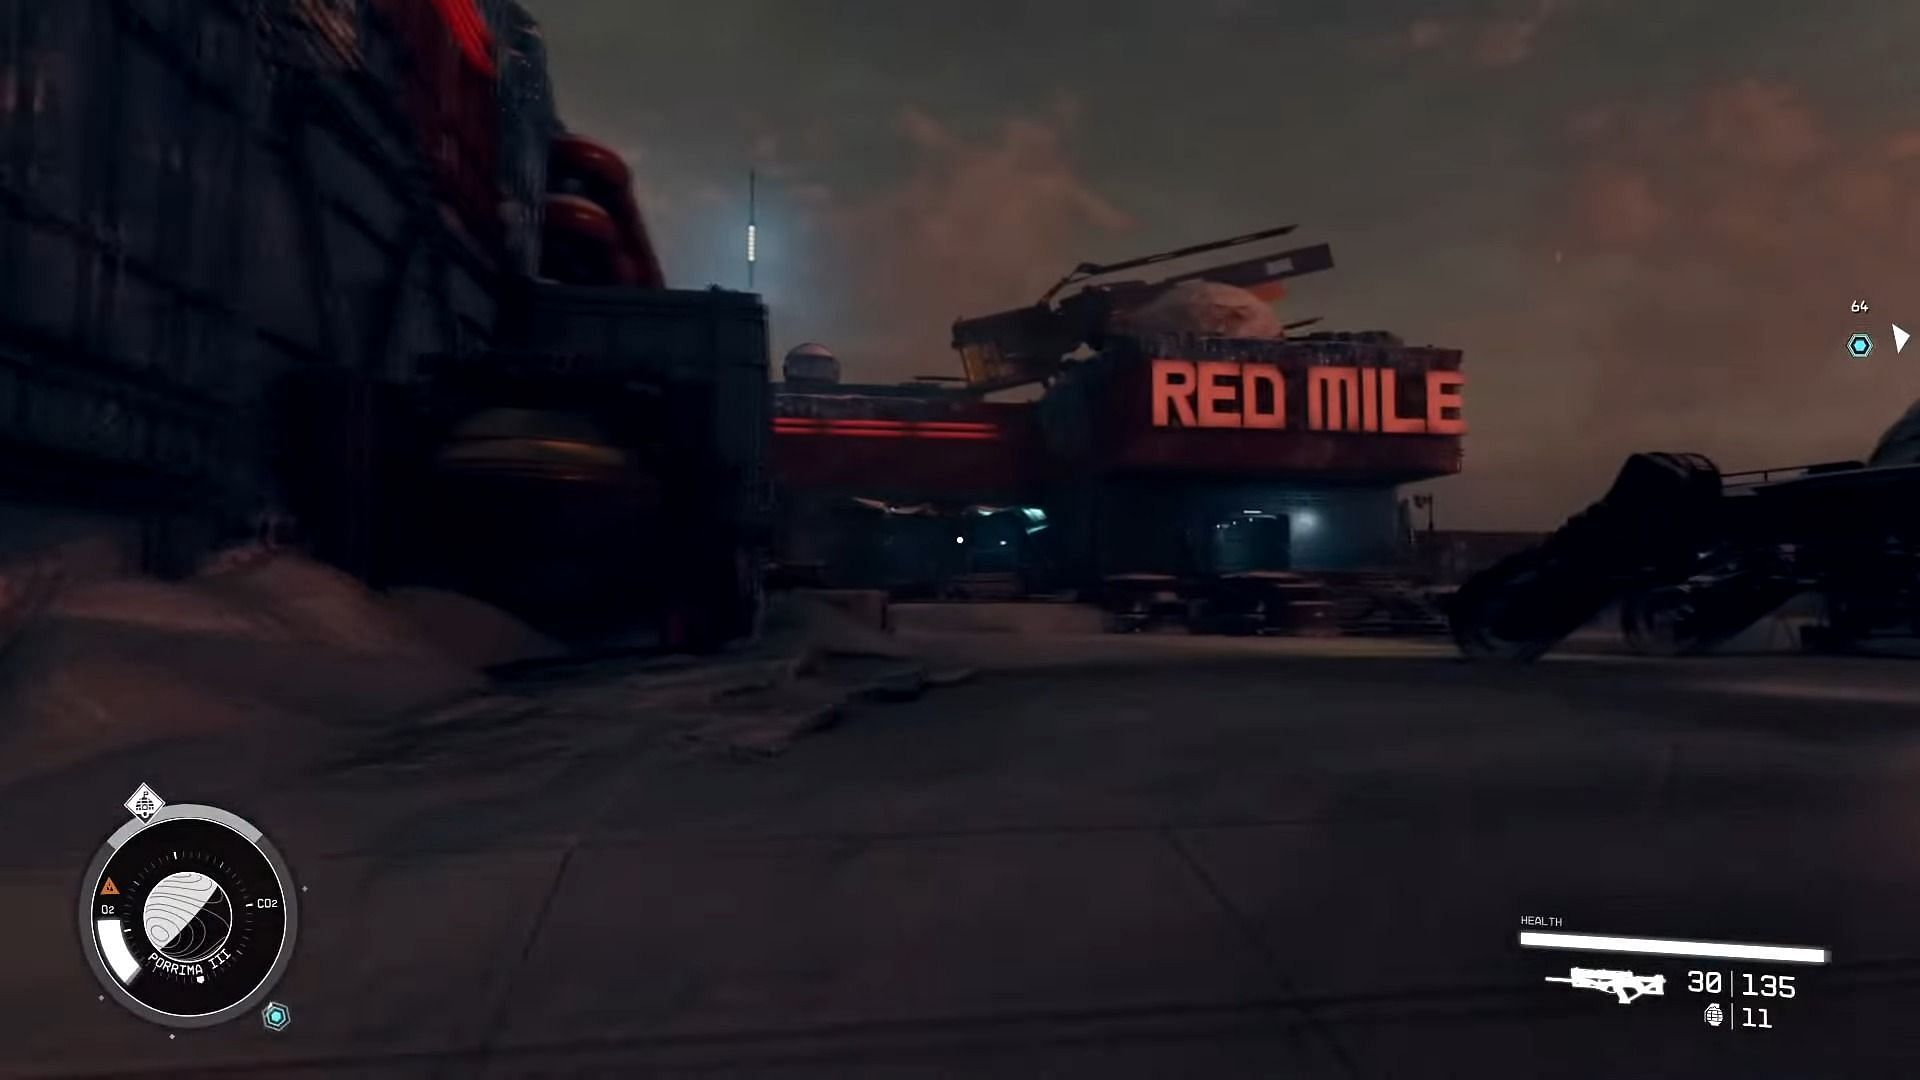 The Red Mile building in Starfield (Image via Bethesda)